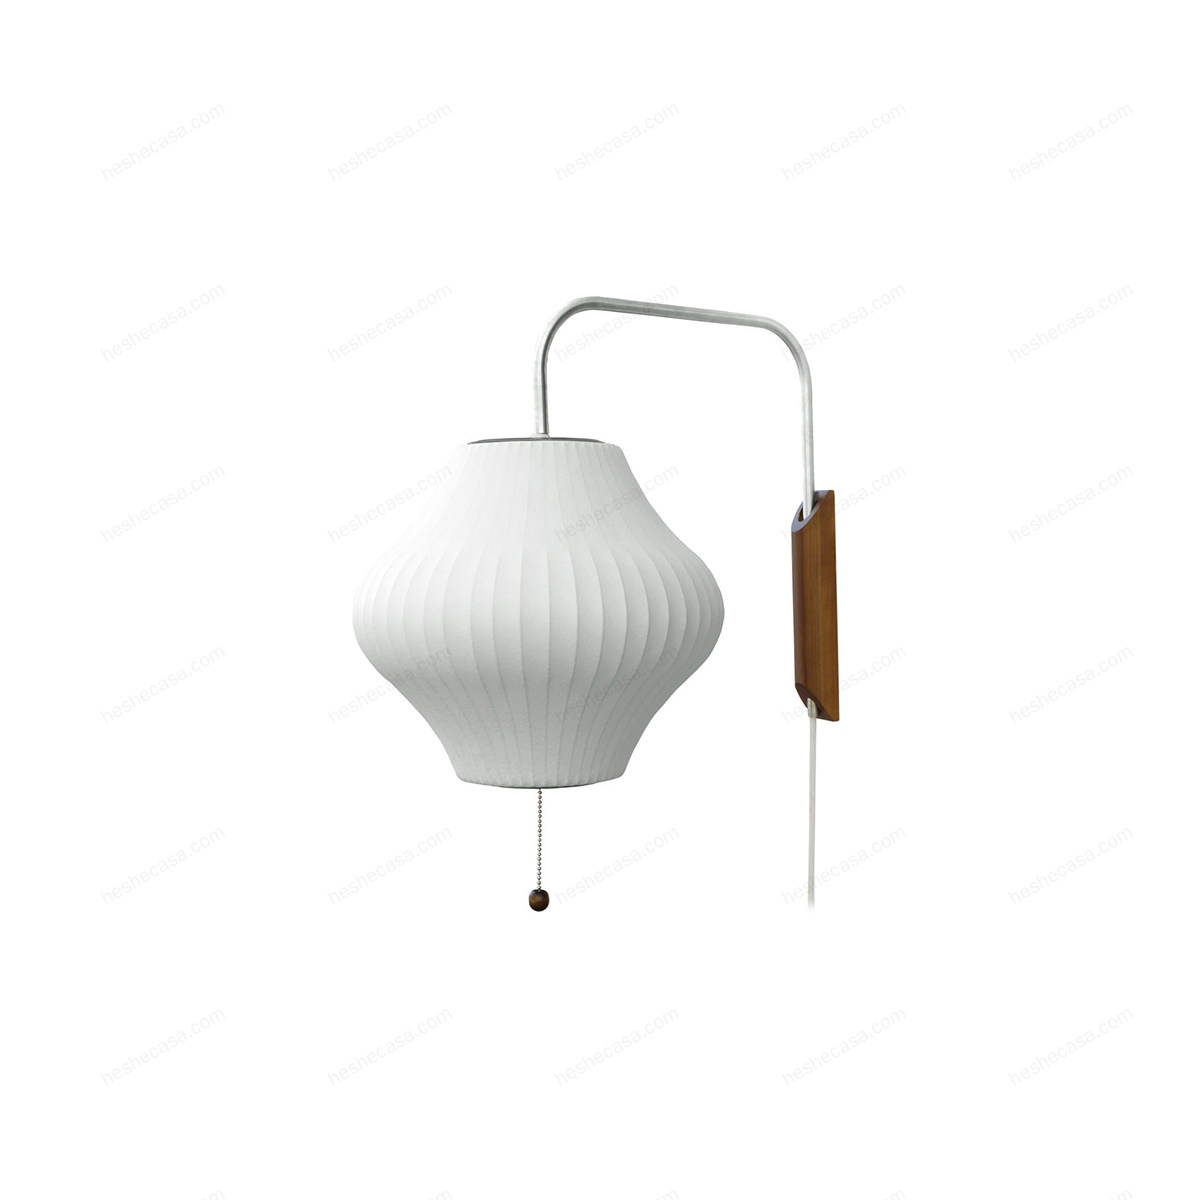 Nelson Pear Wall Sconce Cabled壁灯